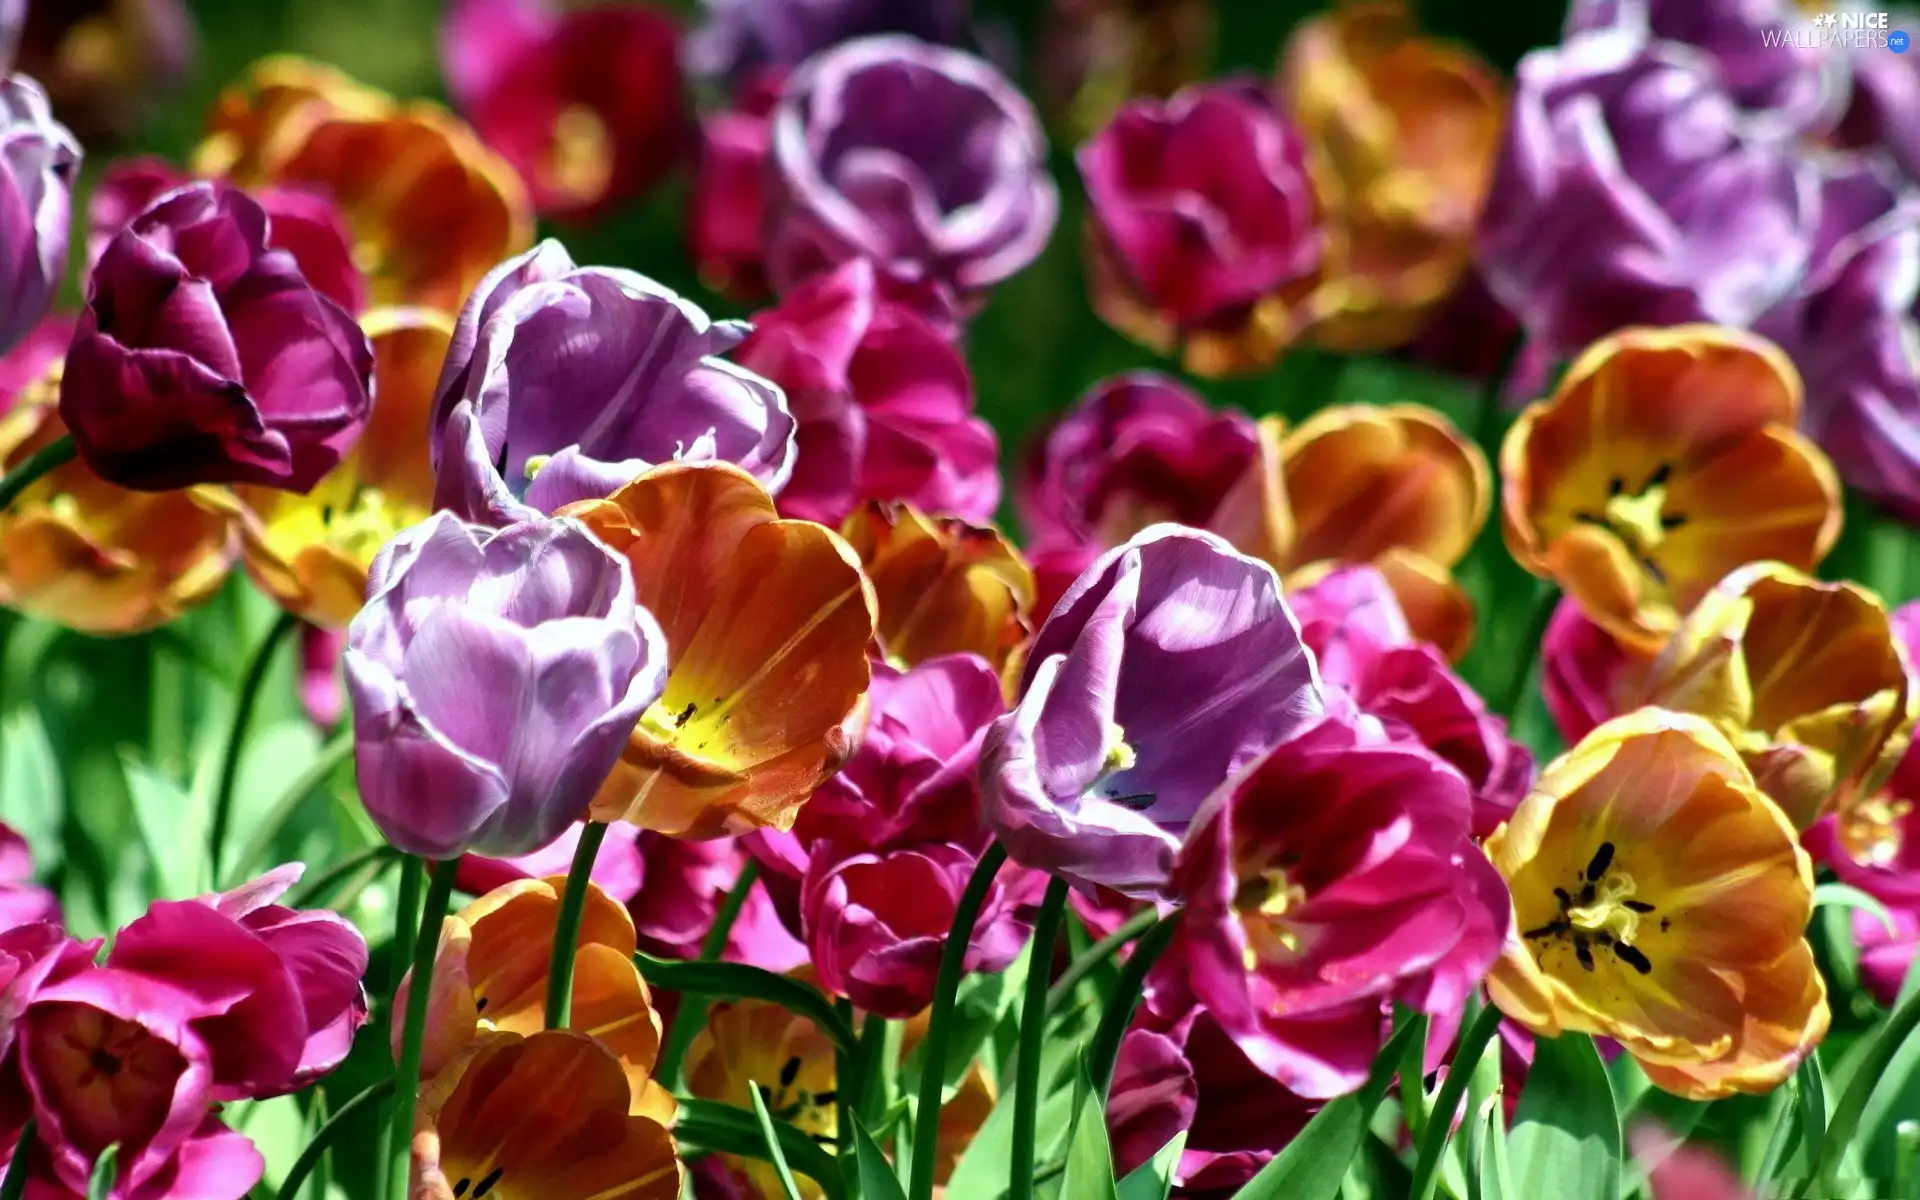 Tulips, Flowers, color